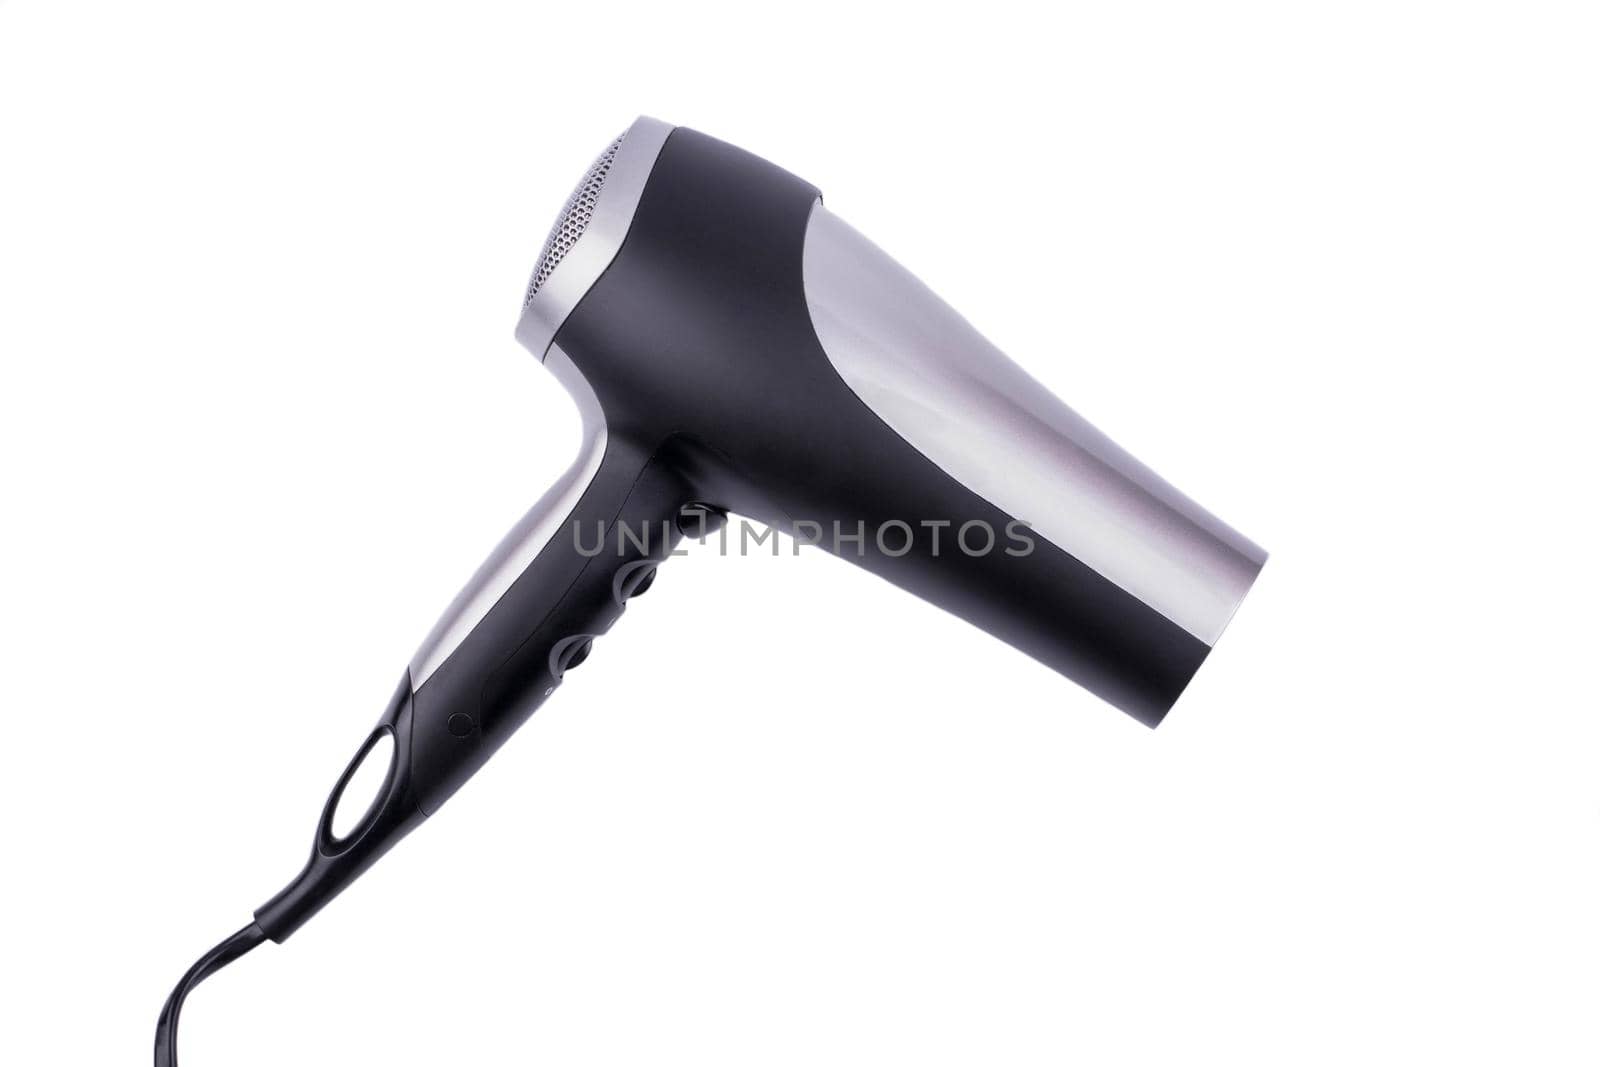 Black and gray hair dryer isolated on white background